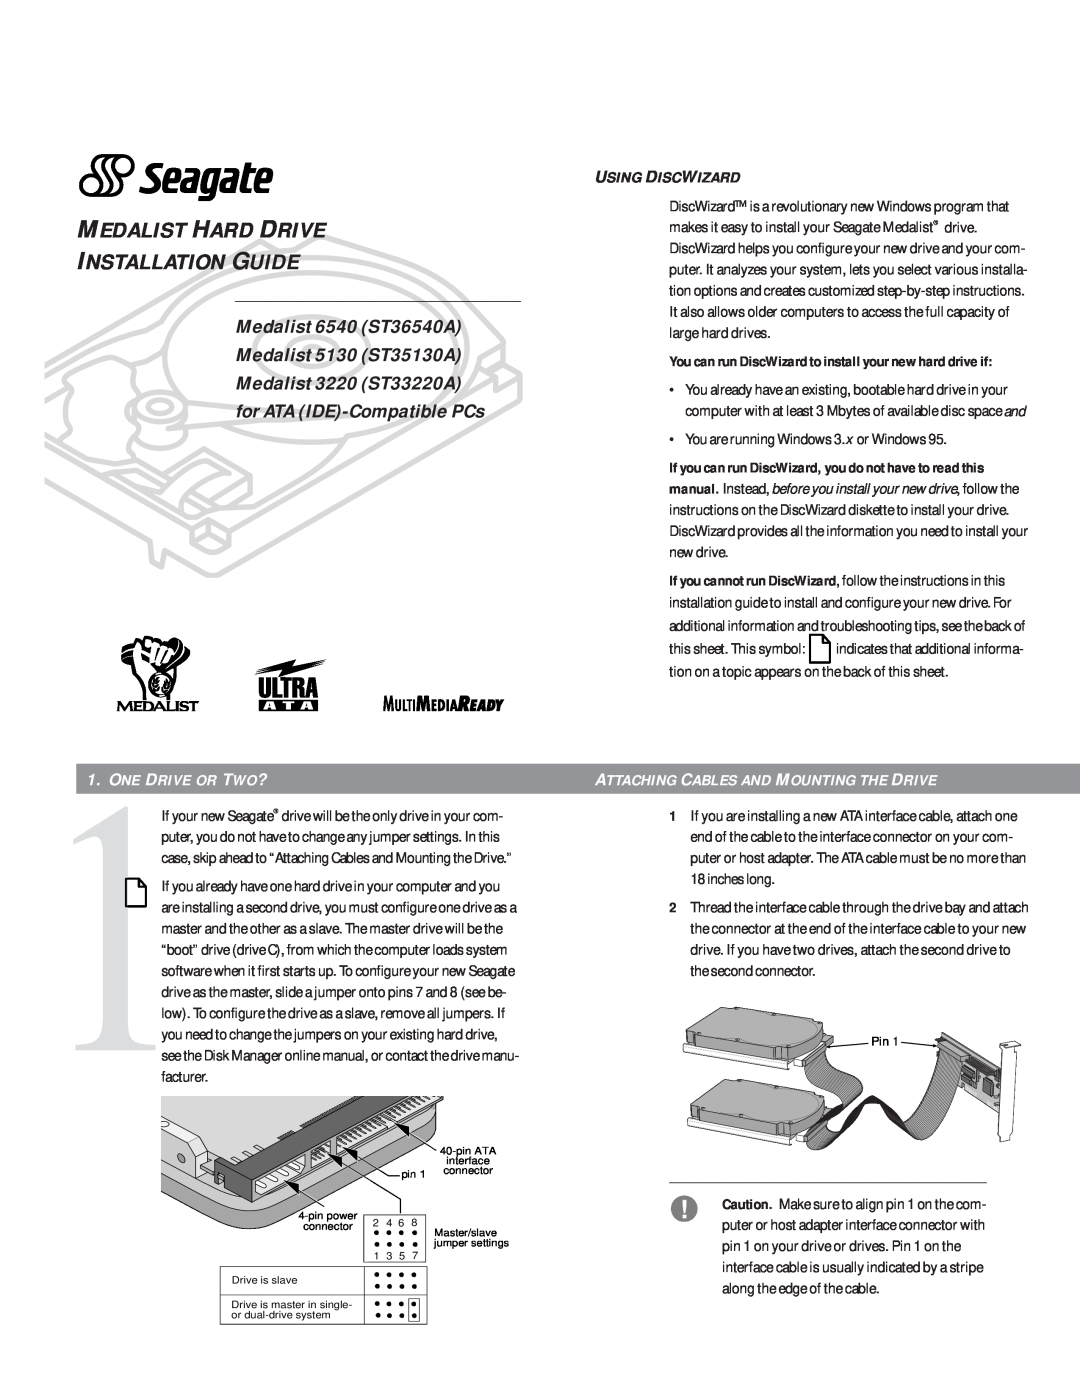 Seagate ST36540A Using Discwizard, One Drive Or Two?, Attaching Cables And Mounting The Drive, inches long, 1facturer 